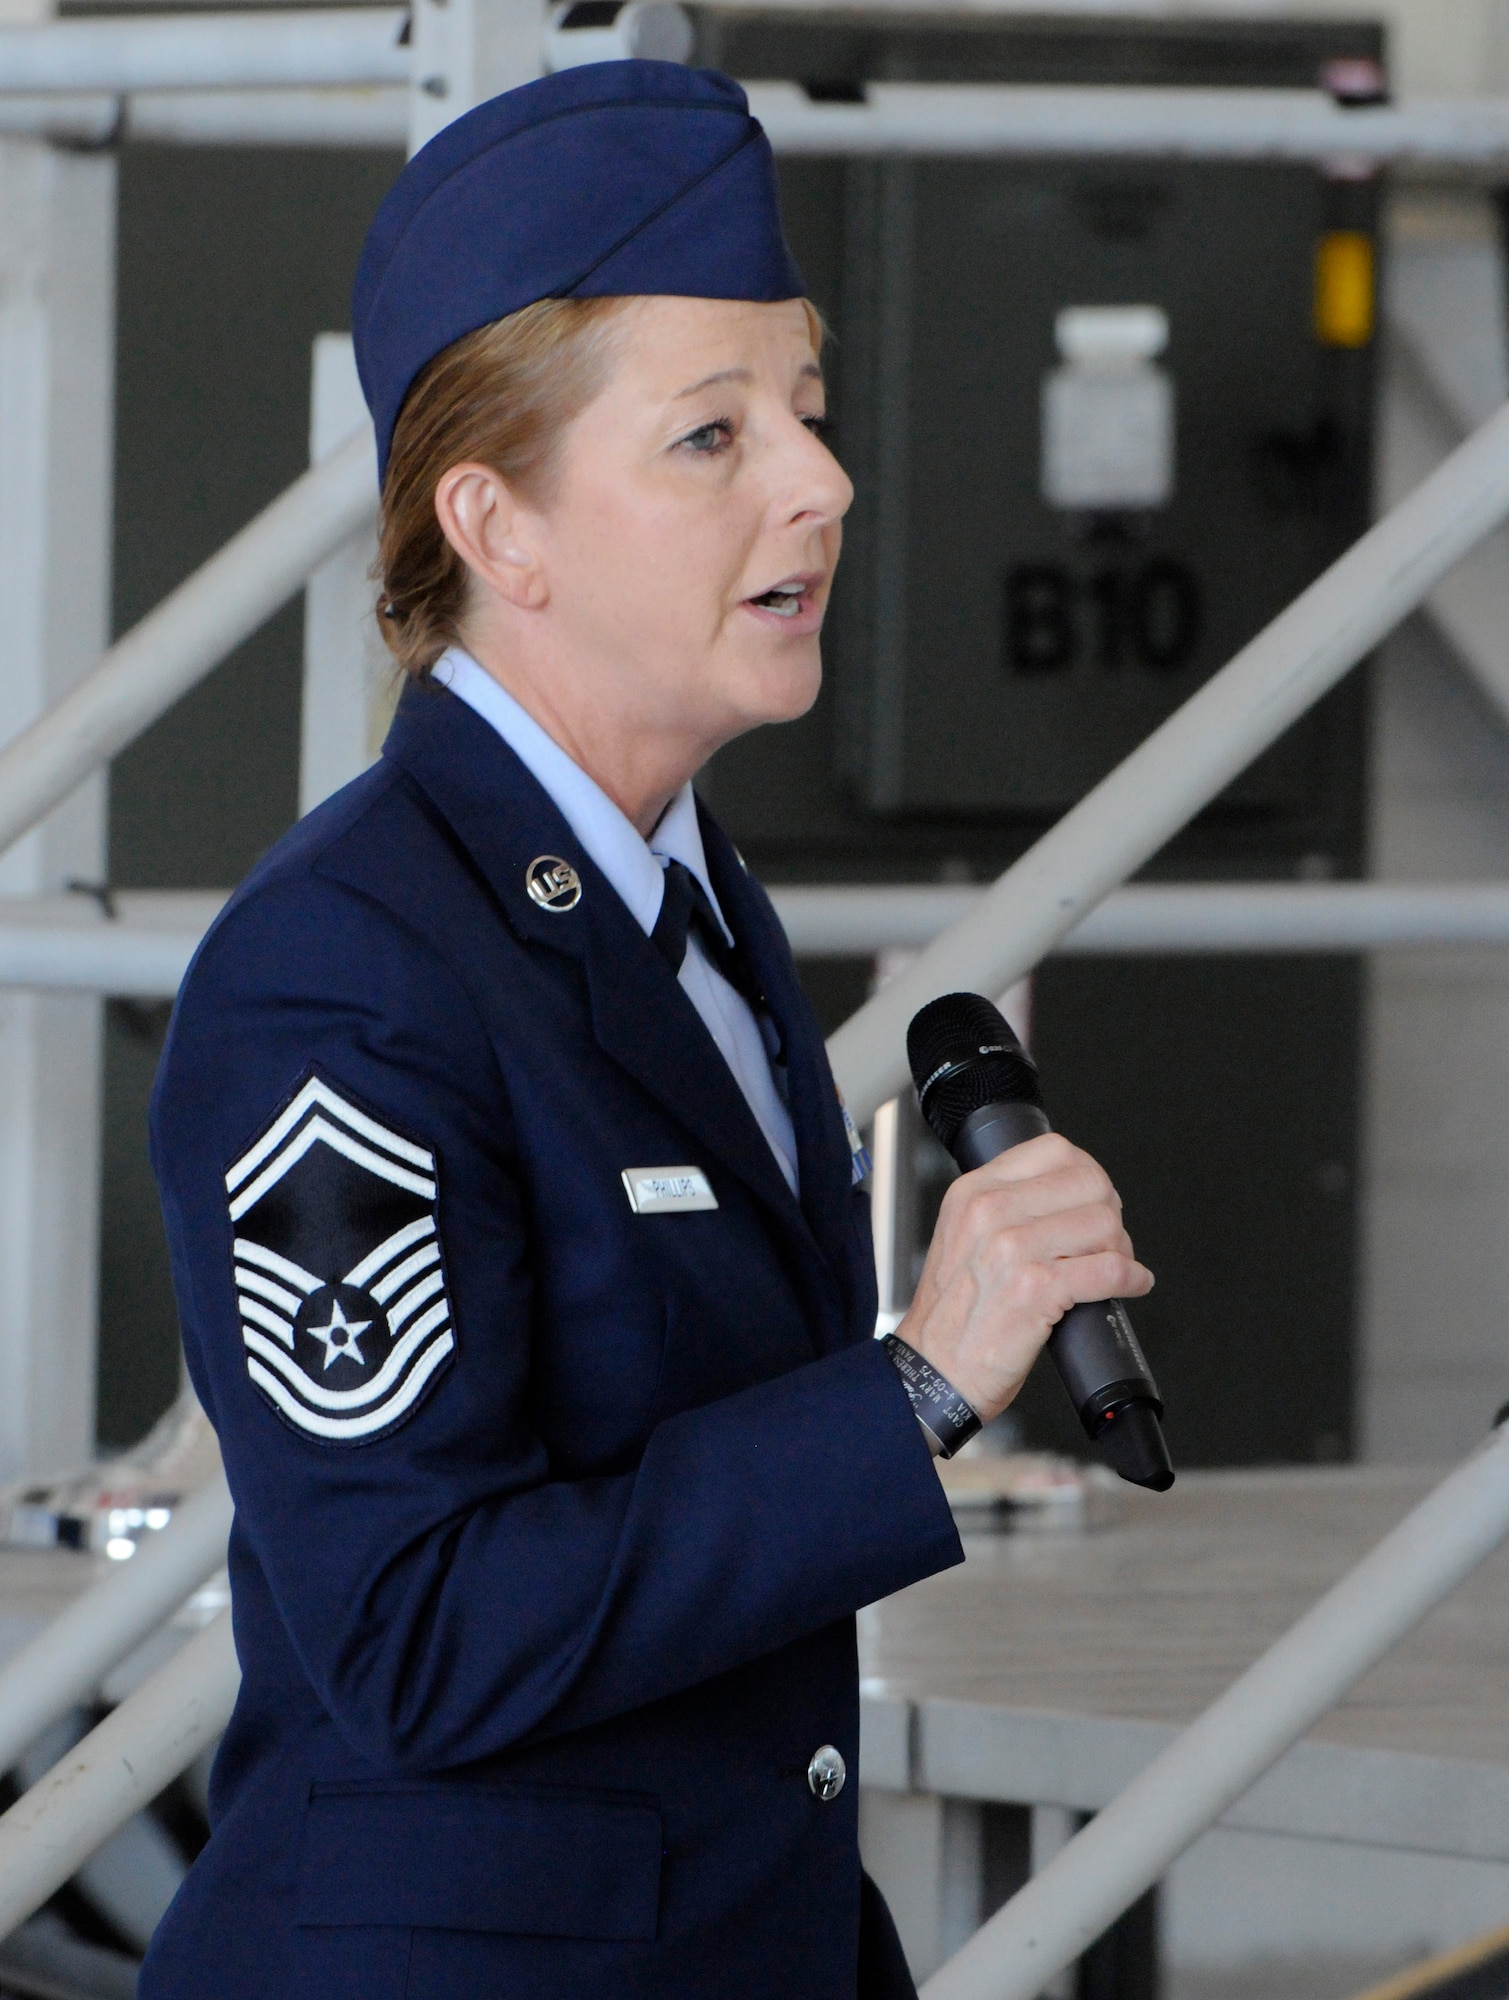 Oregon Air National Guard Senior Master Sgt. Denise Phillips, assigned to the 142nd Fighter Wing Mission Support Group, sings the National Anthem during the 142nd Fighter Wing mobilization ceremony, June 26, 2015, Portland Air National Guard Base, Ore. (U.S. Air National Guard photo by Tech. Sgt. John Hughel, 142nd Fighter Wing Public Affairs/Released)